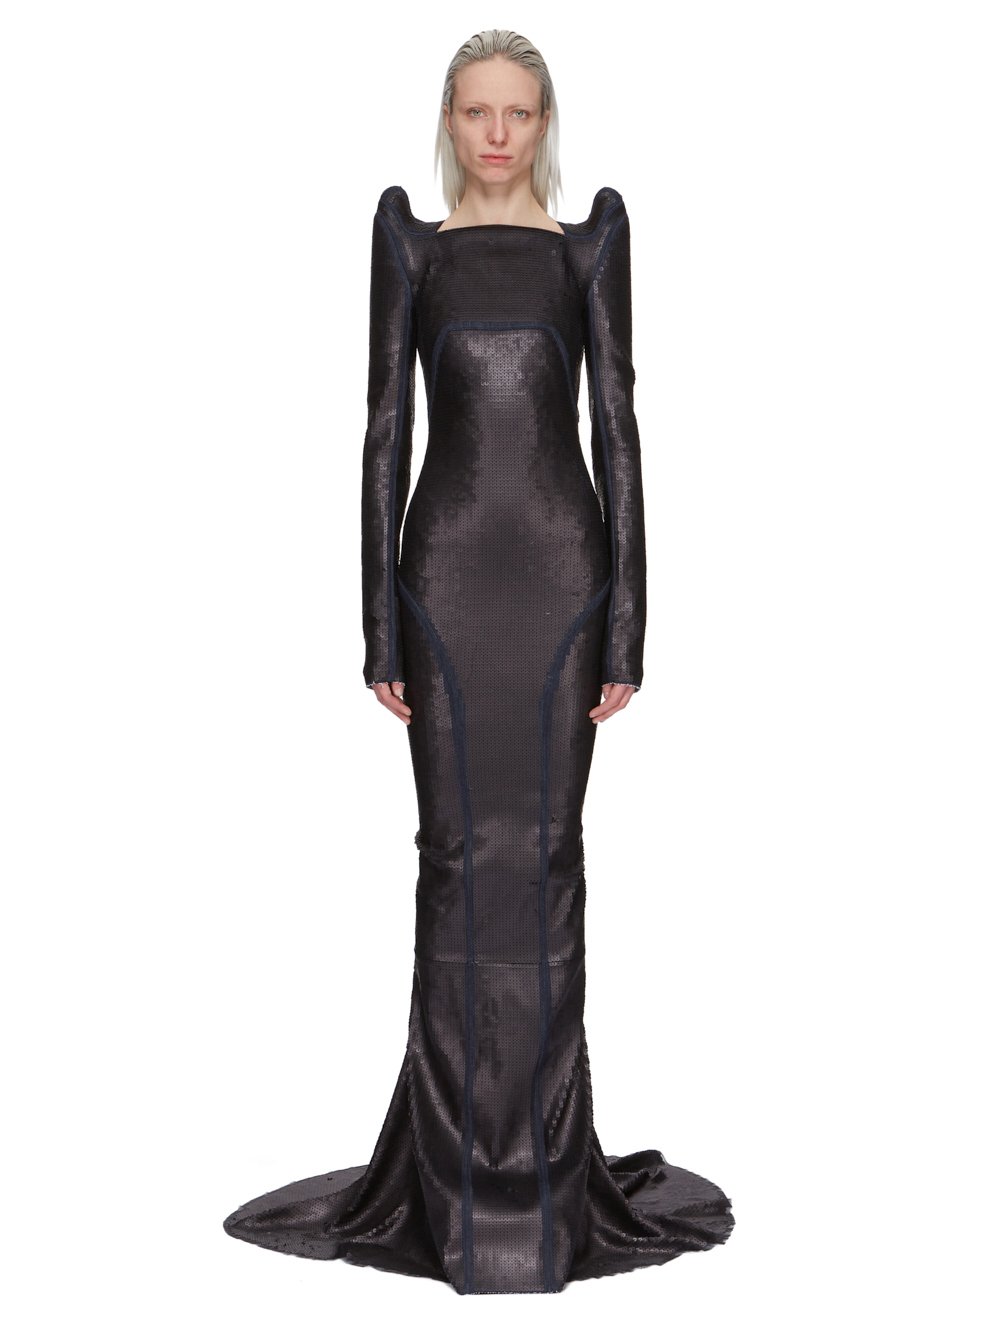 RICK OWENS FW23 LUXOR RUNWAY TEC GOWN IN BLUE AND BLACK SEQUIN EMBROIDERED STRETCH DENIM